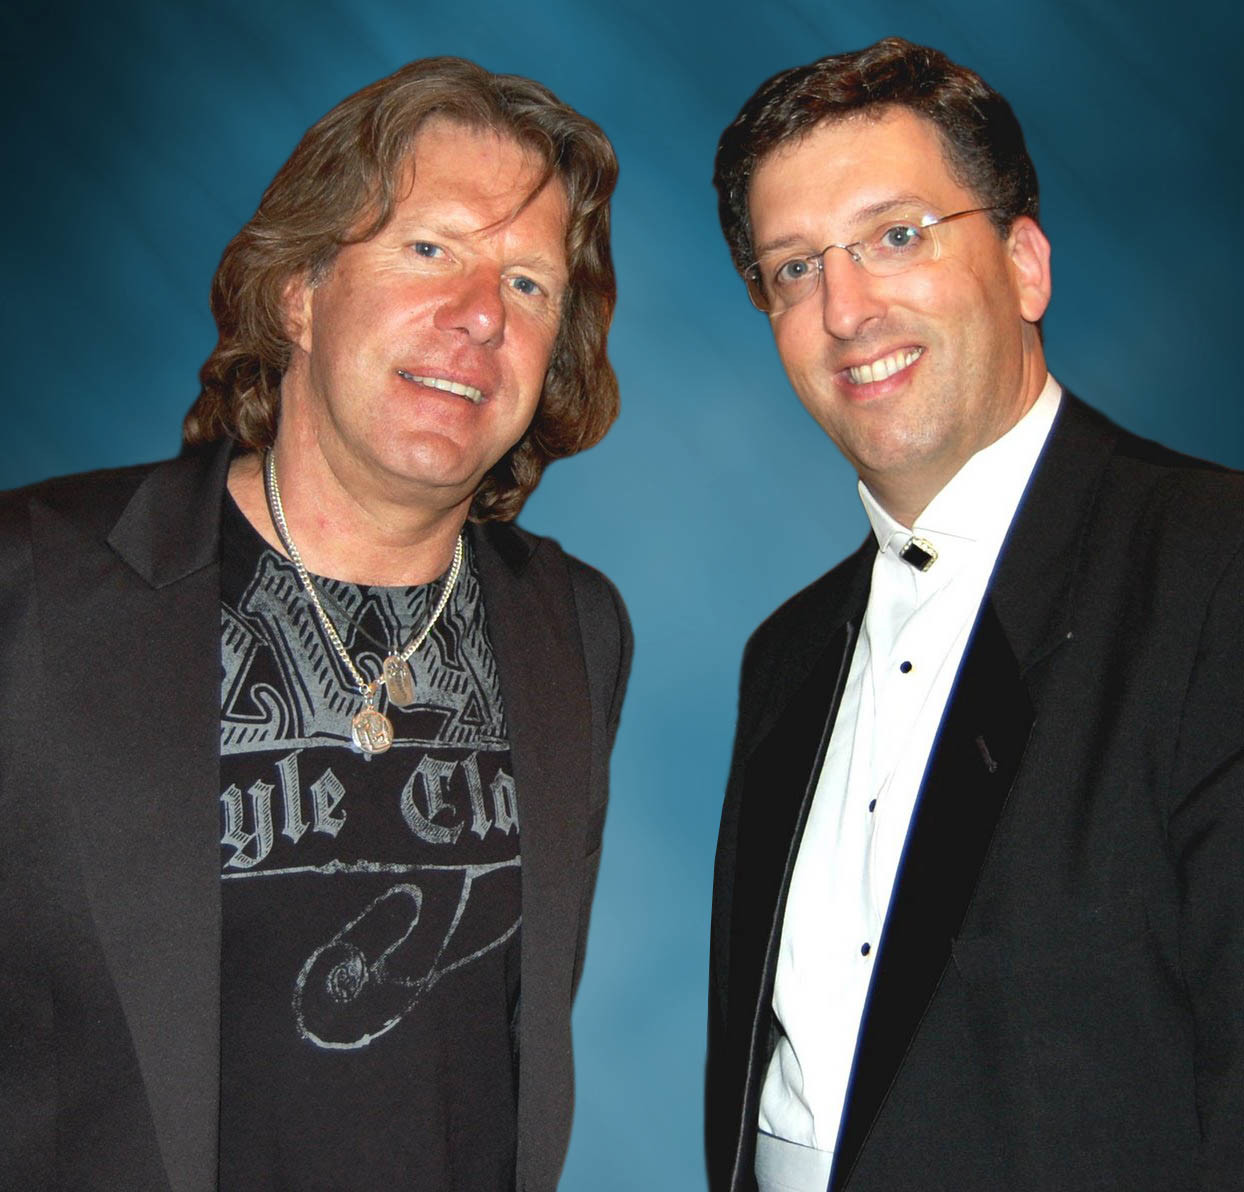 Keith Emerson, left, said that pianist Jeffrey Biegel will stay true to his composition of “Piano Concerto No. 1,” which Emerson first performed in 1977 with “Emerson, Lake & Palmer.”